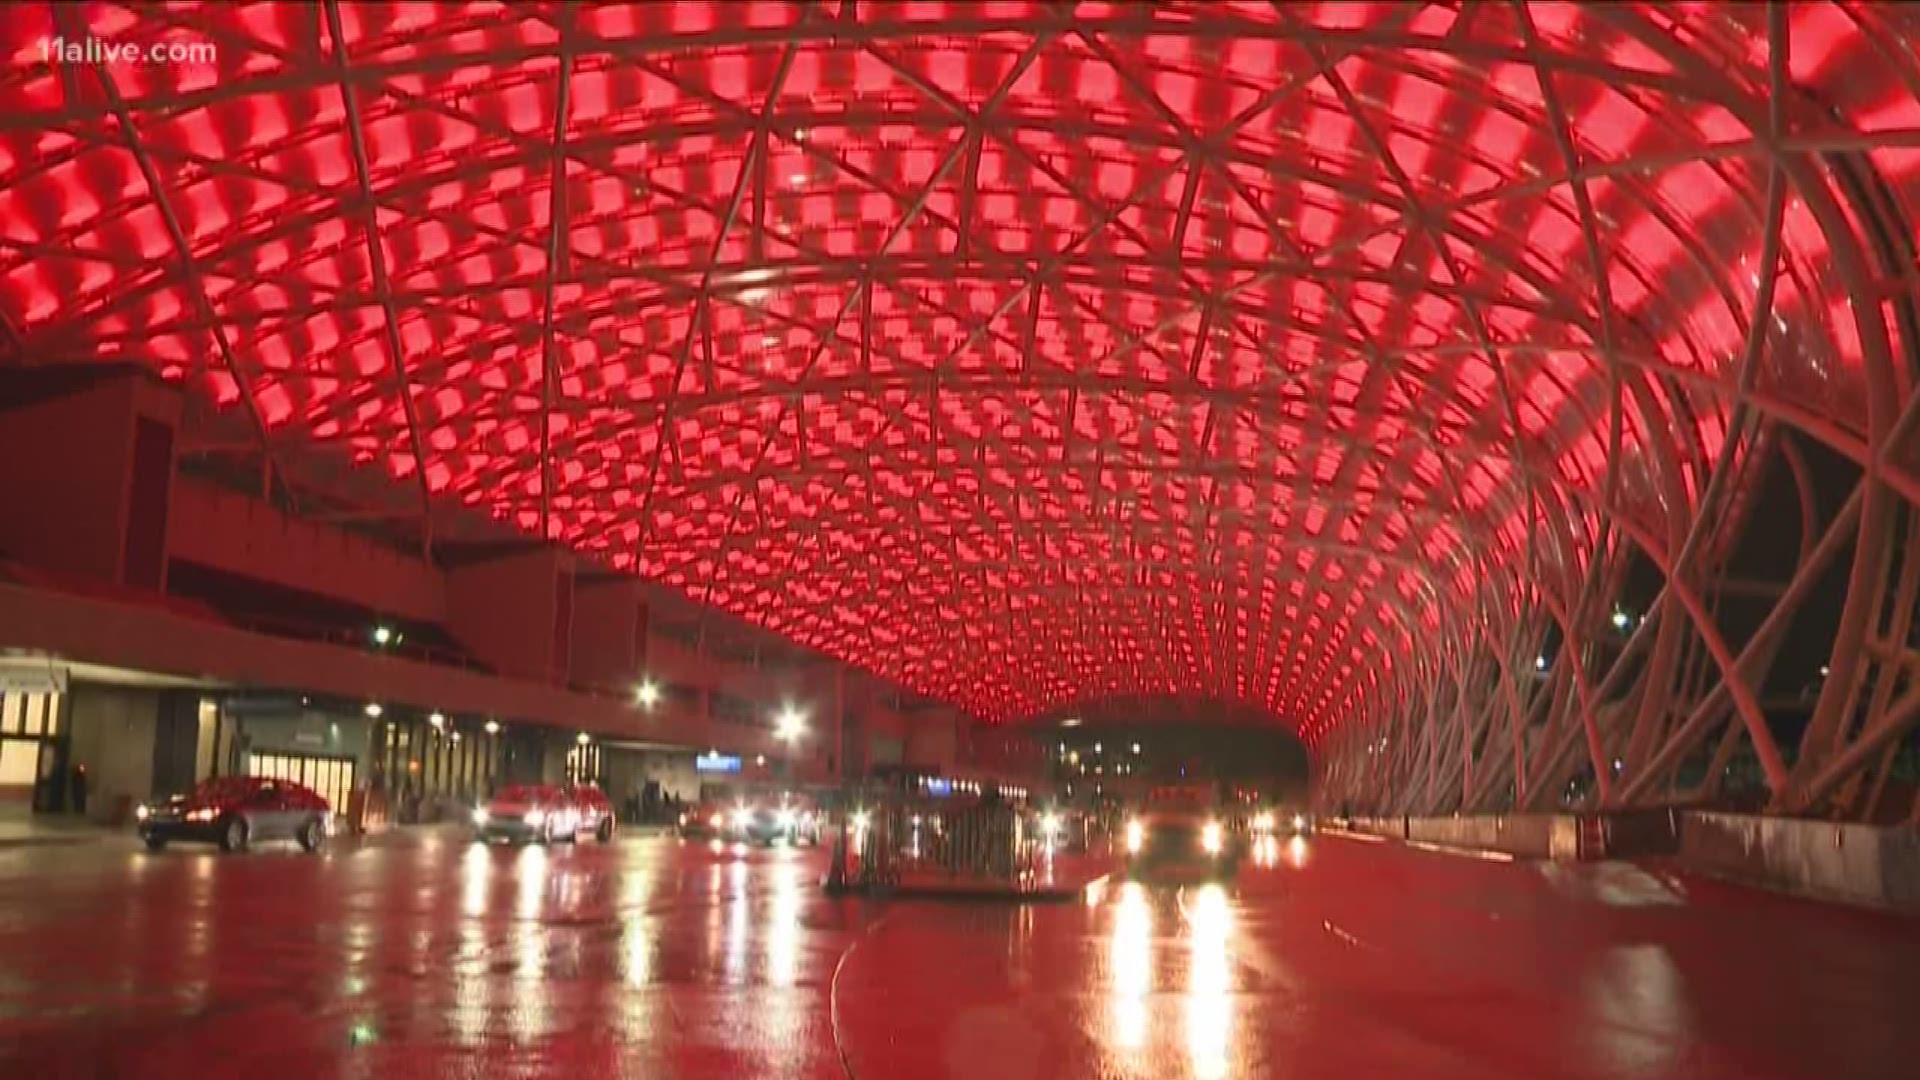 The 1,800 light illumination is the first of its kind since the canopy's installation.